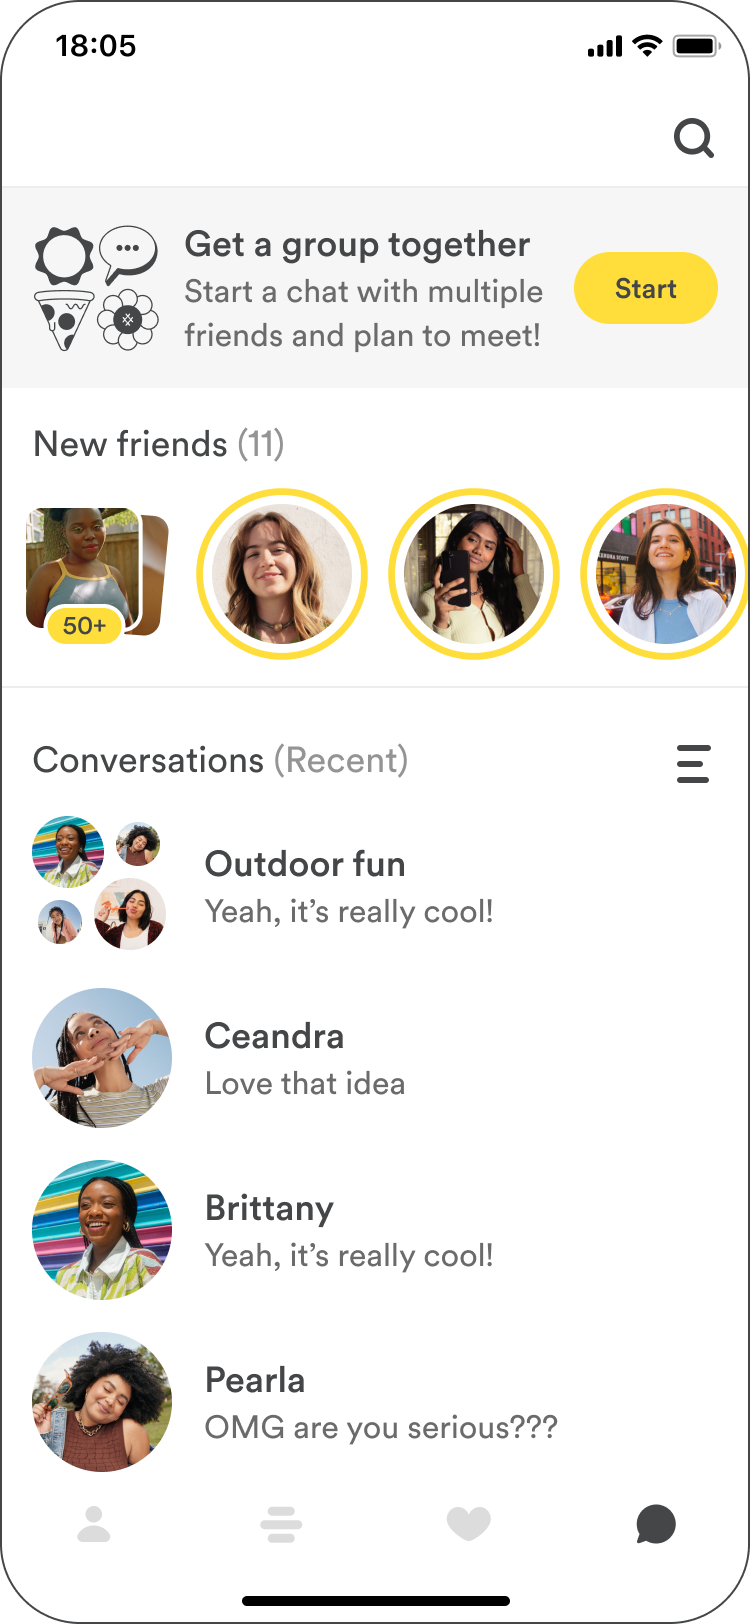 Find New Friends With Bumble For Friends App